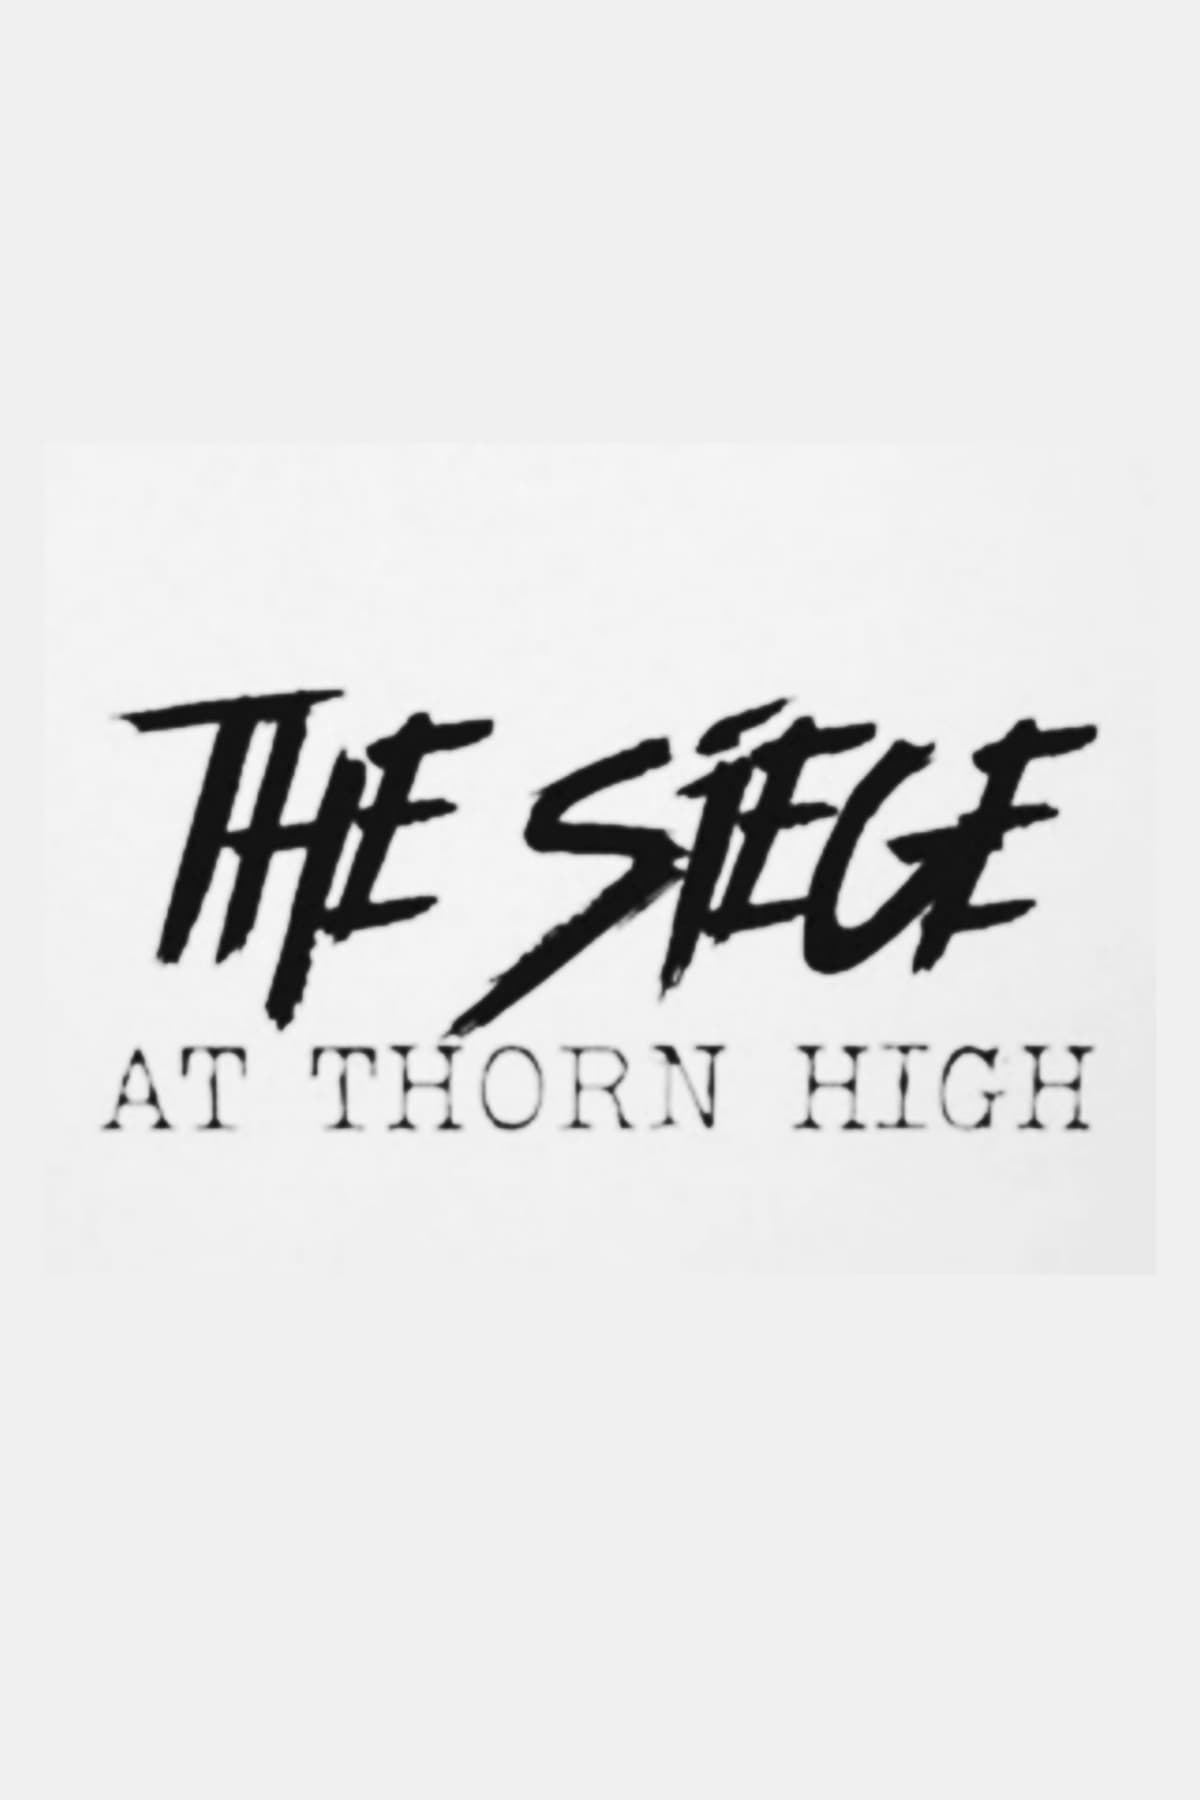 The Siege at Thorn High